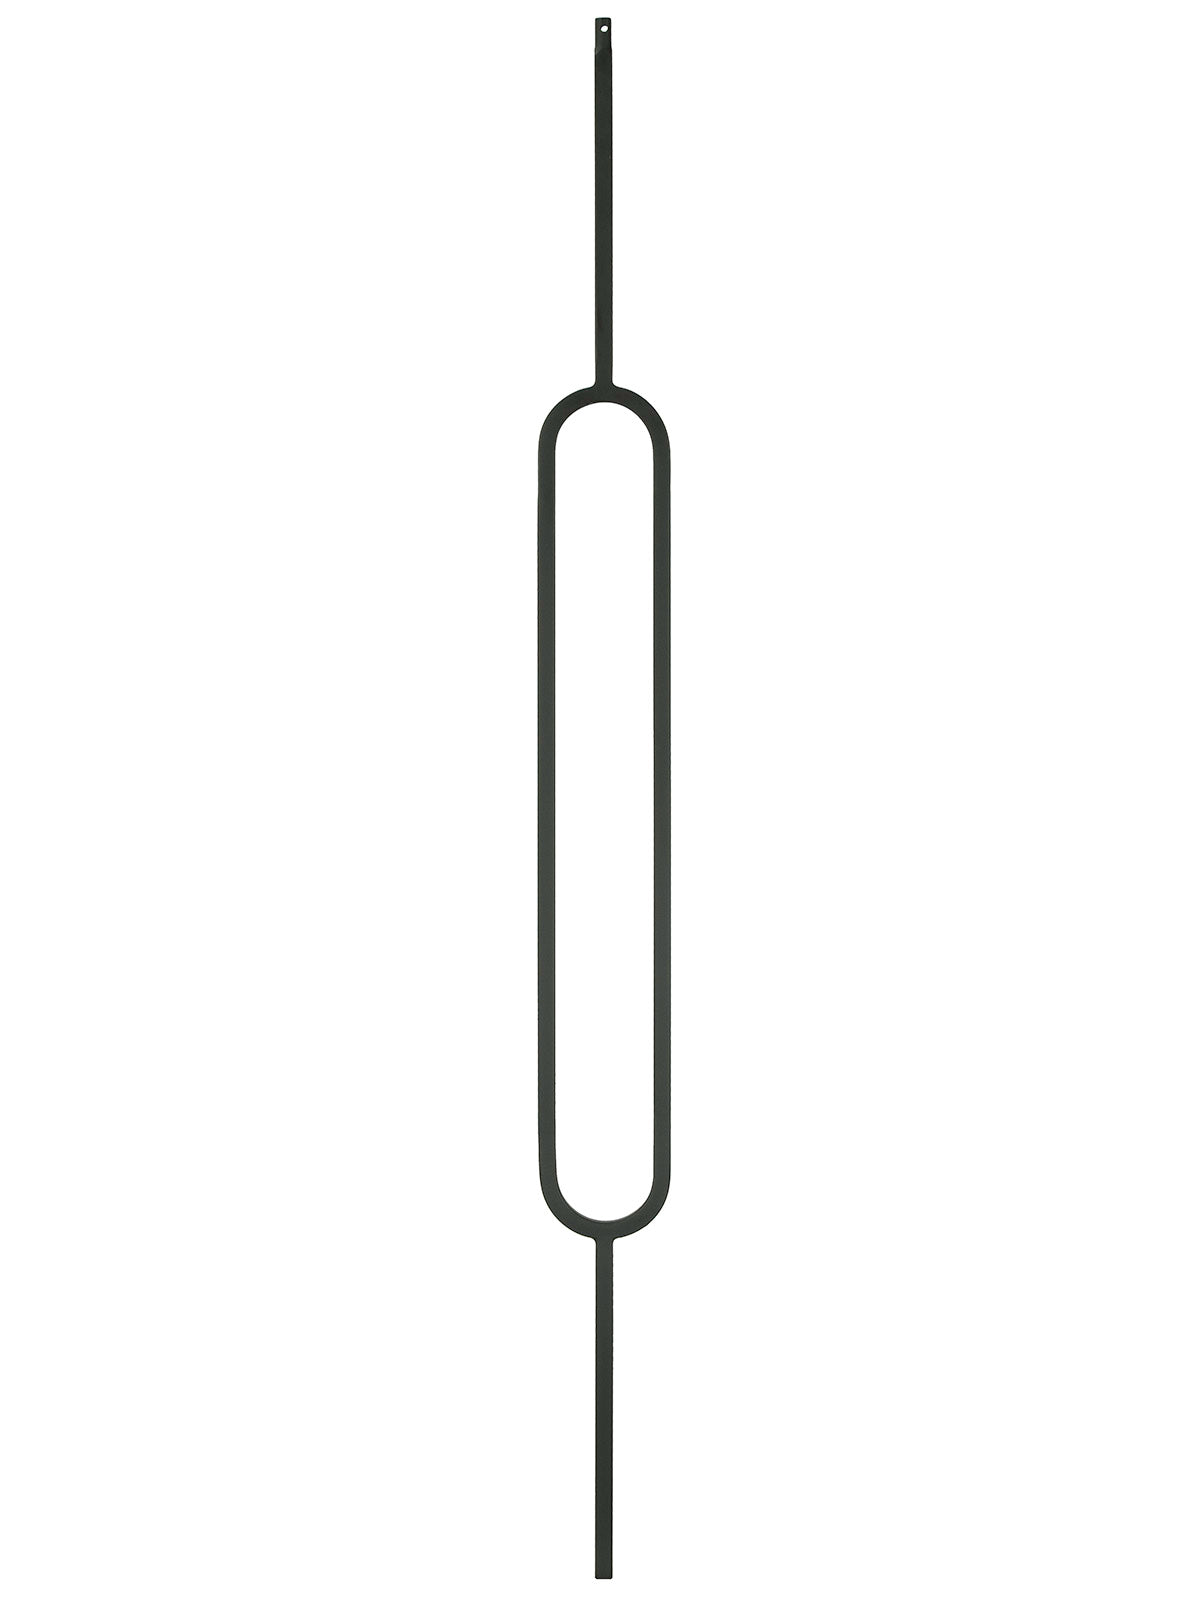 Iron Baluster 9088R-XL - 5/8" Round - 24" Contemporary Oval